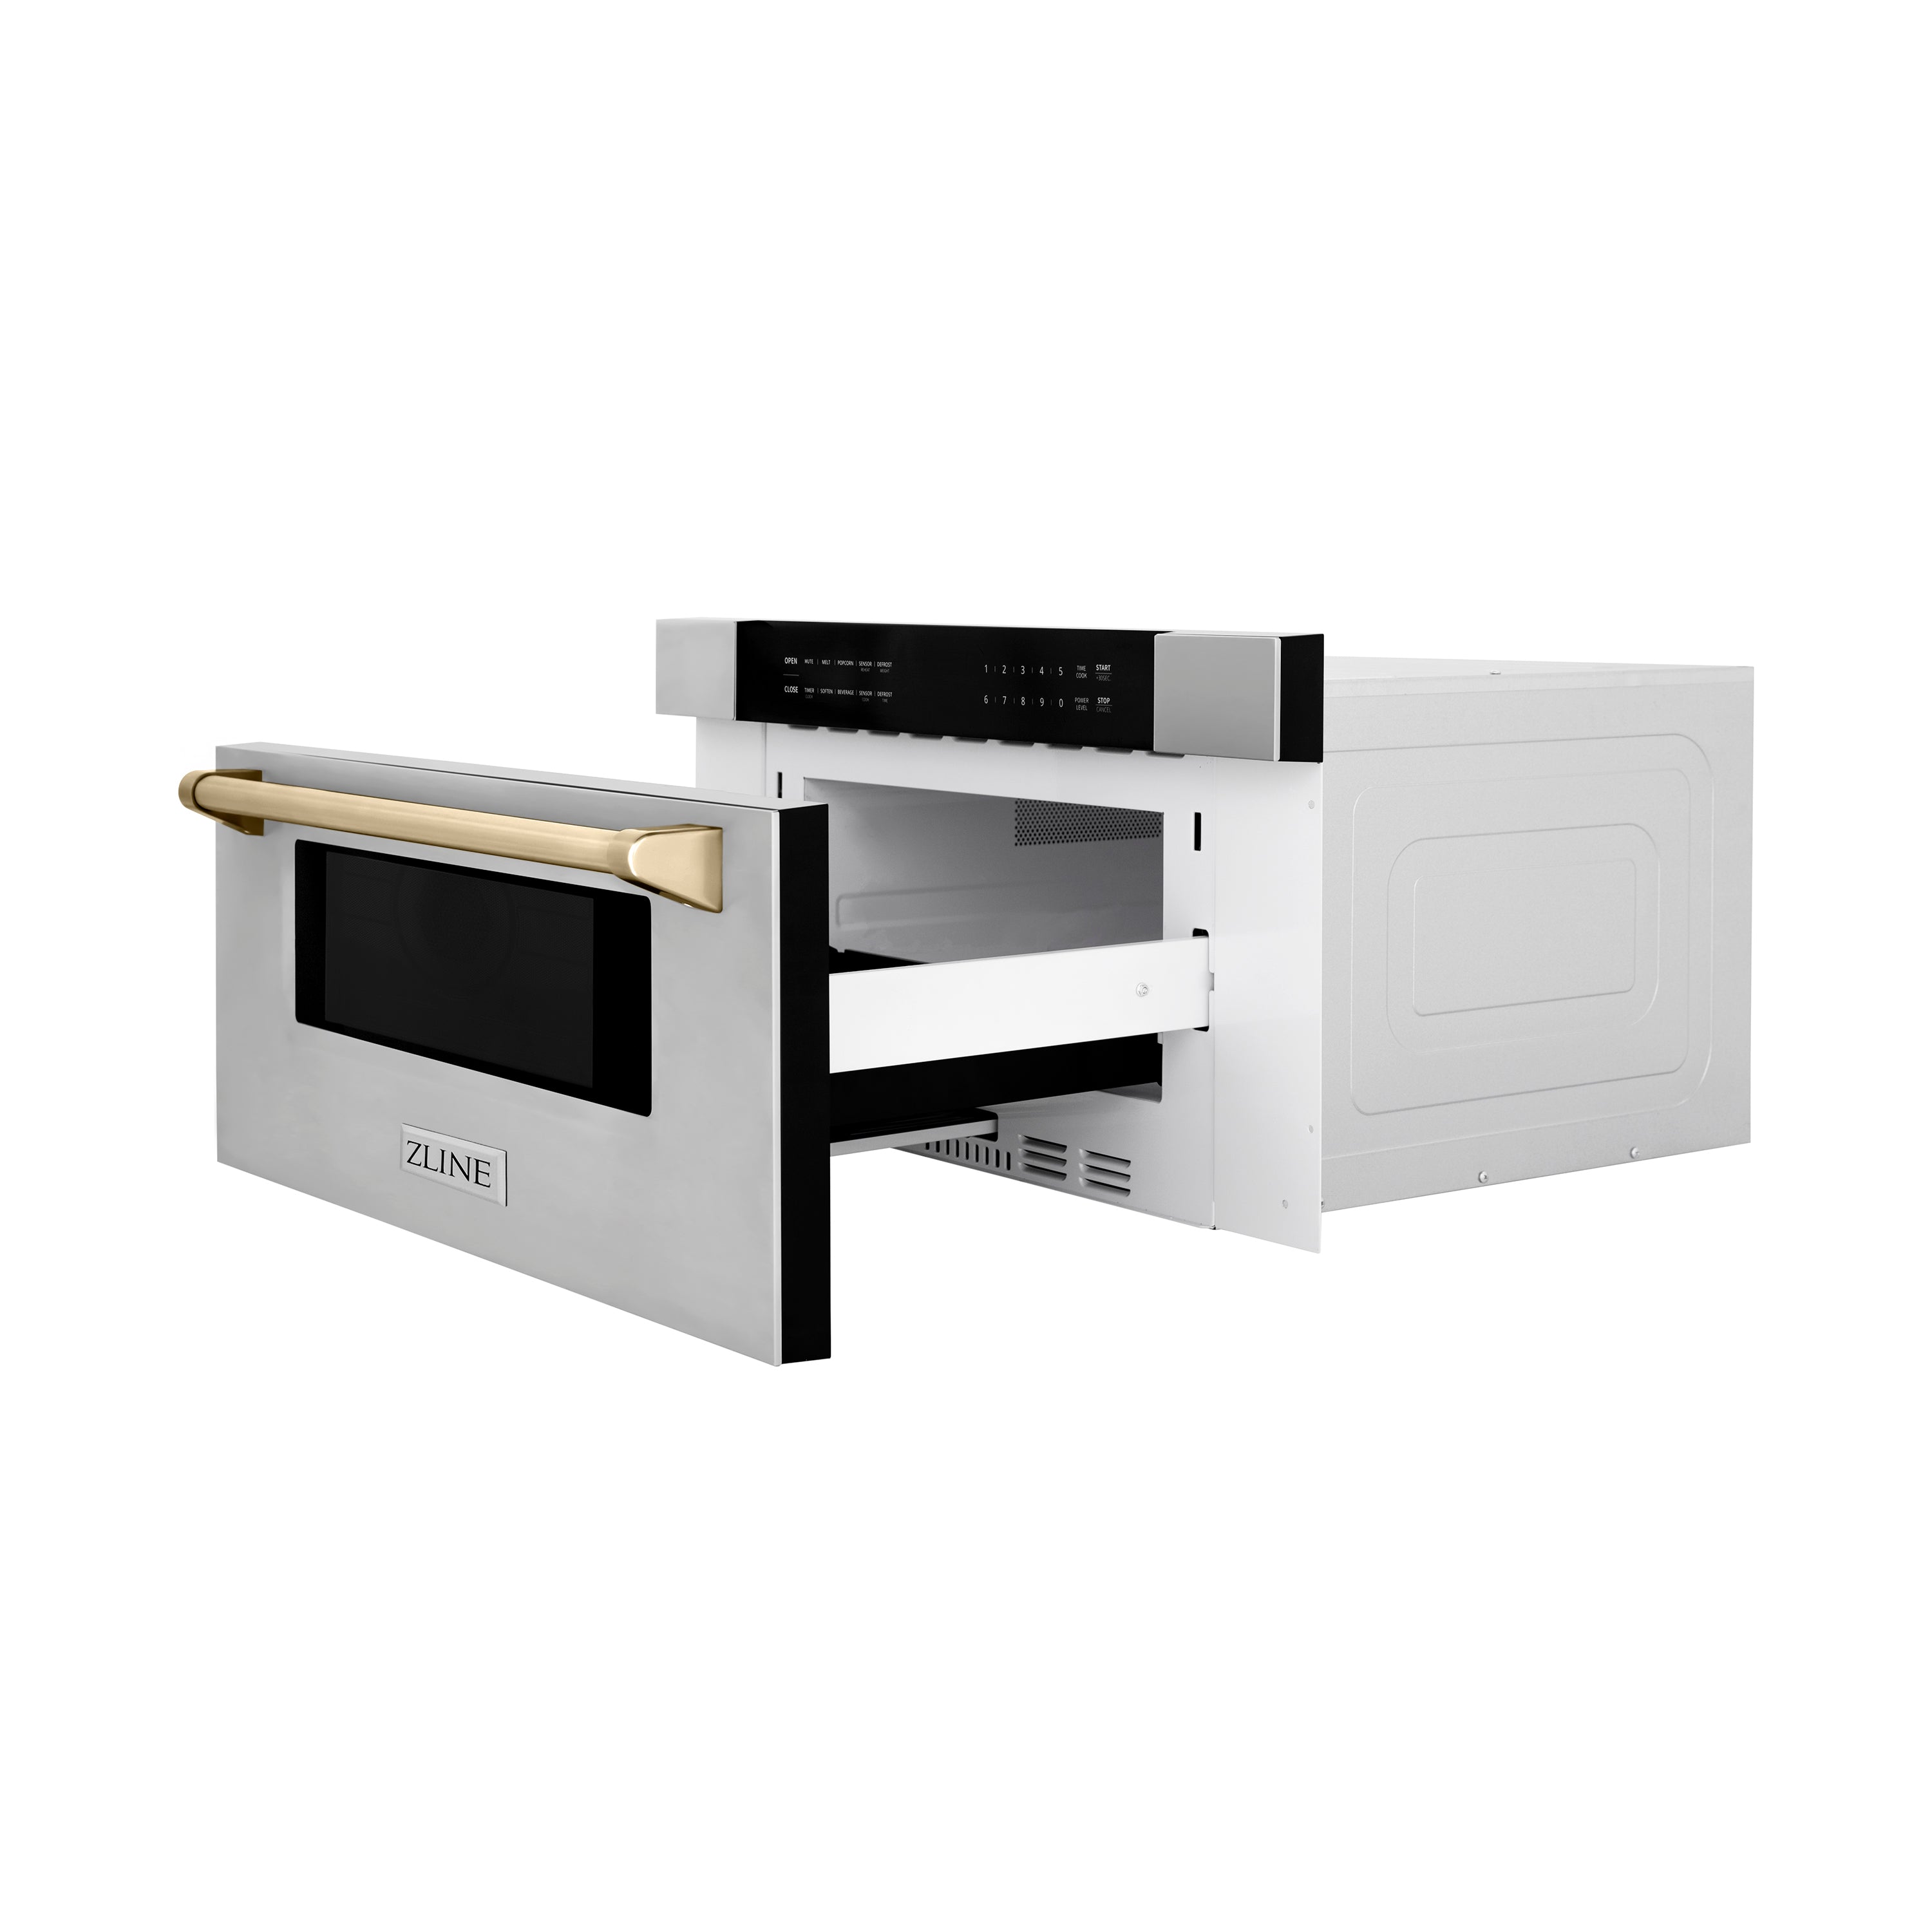 ZLINE Autograph Edition 30 in. 1.2 cu. ft. Built-In Microwave Drawer in Stainless Steel with Gold Accents (MWDZ-30-G) Side View Drawer Open